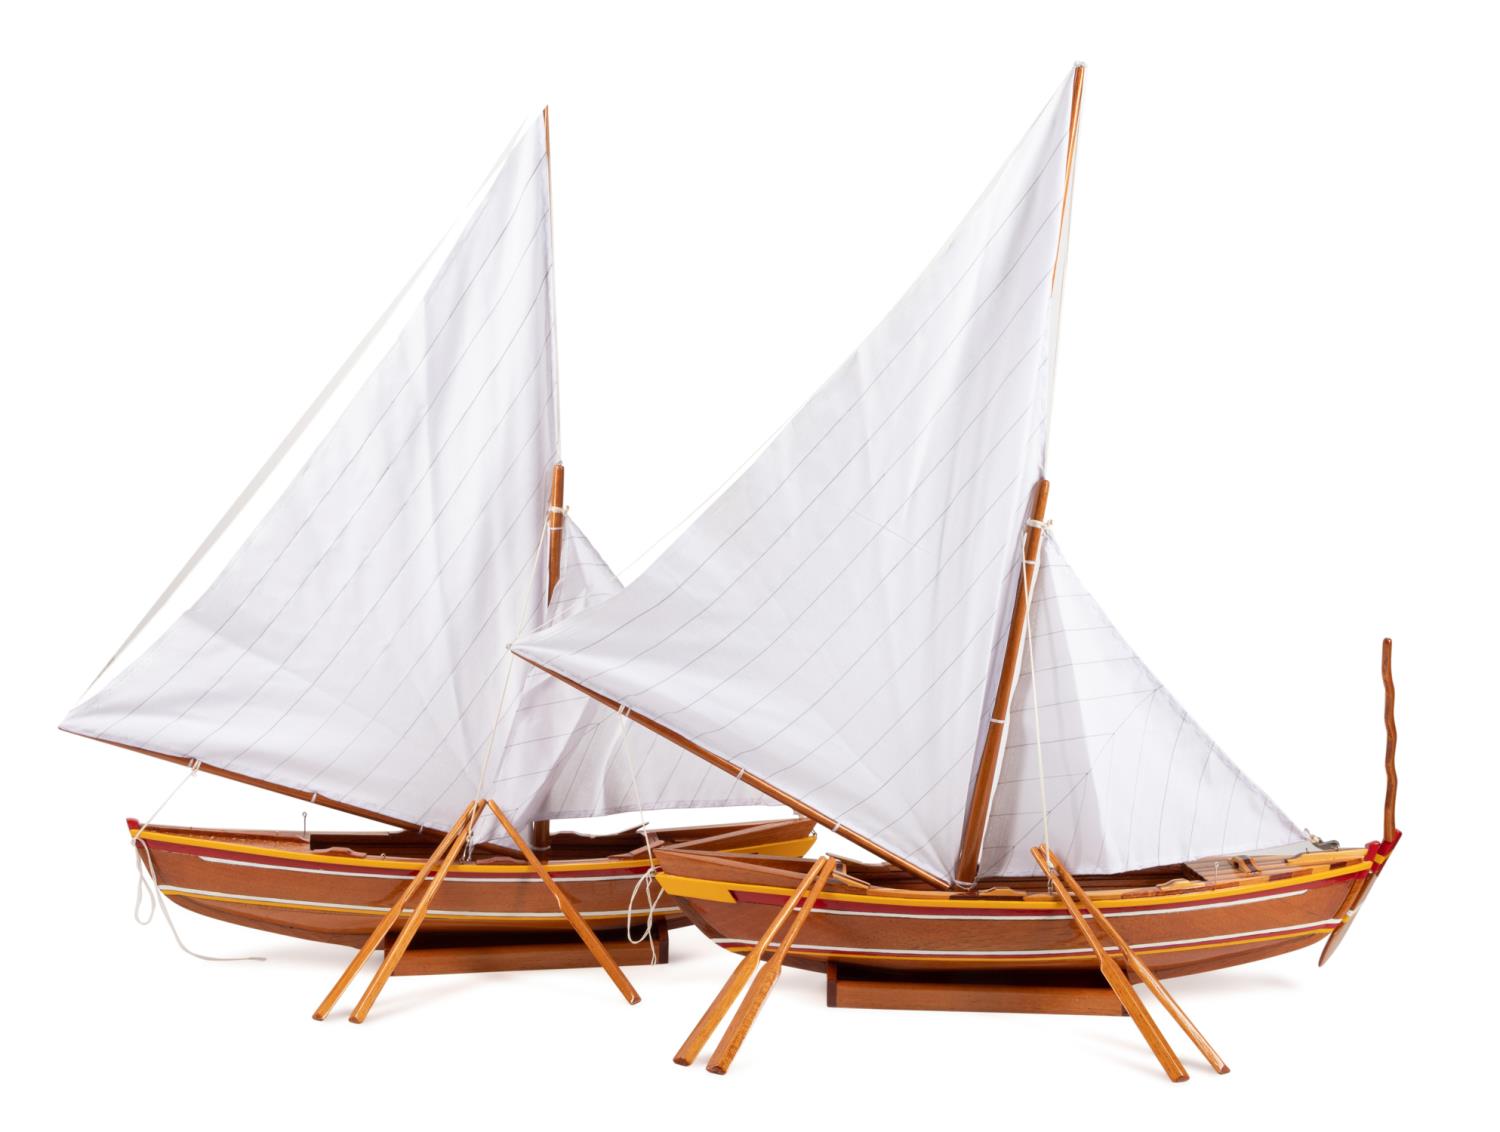 TWO WOODEN POND BOAT MODELS WITH 2f9d06